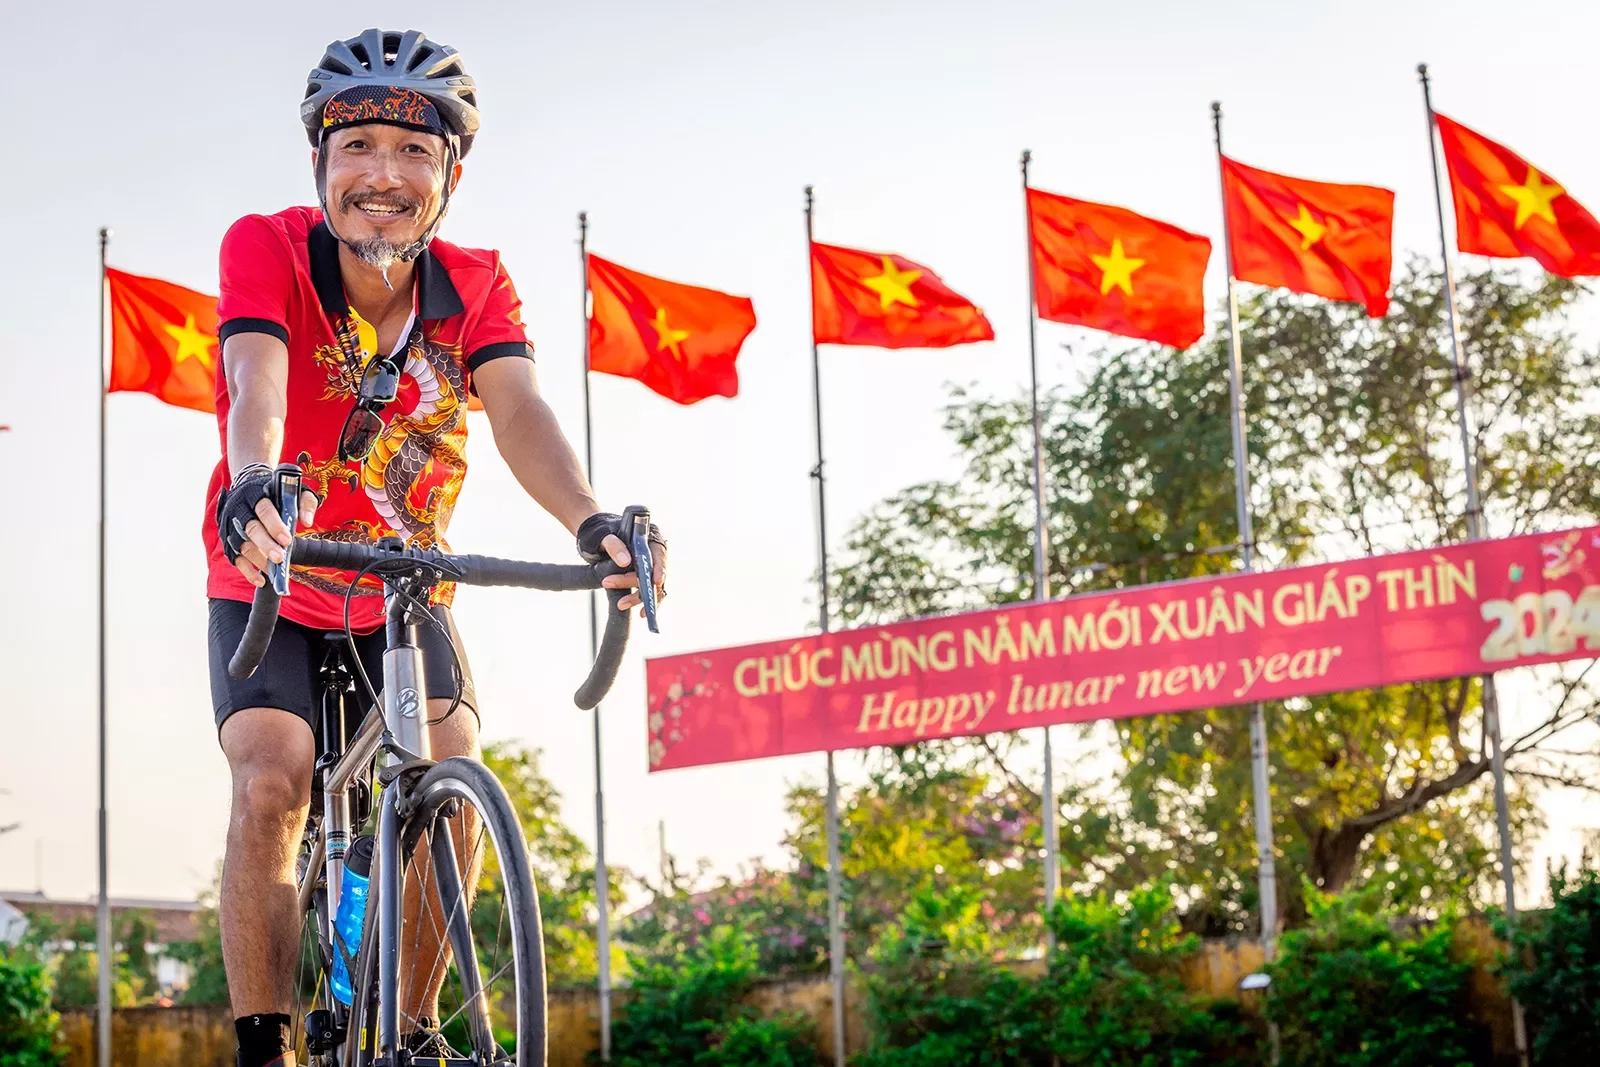 A man smiles while biking in front of a row of red flags